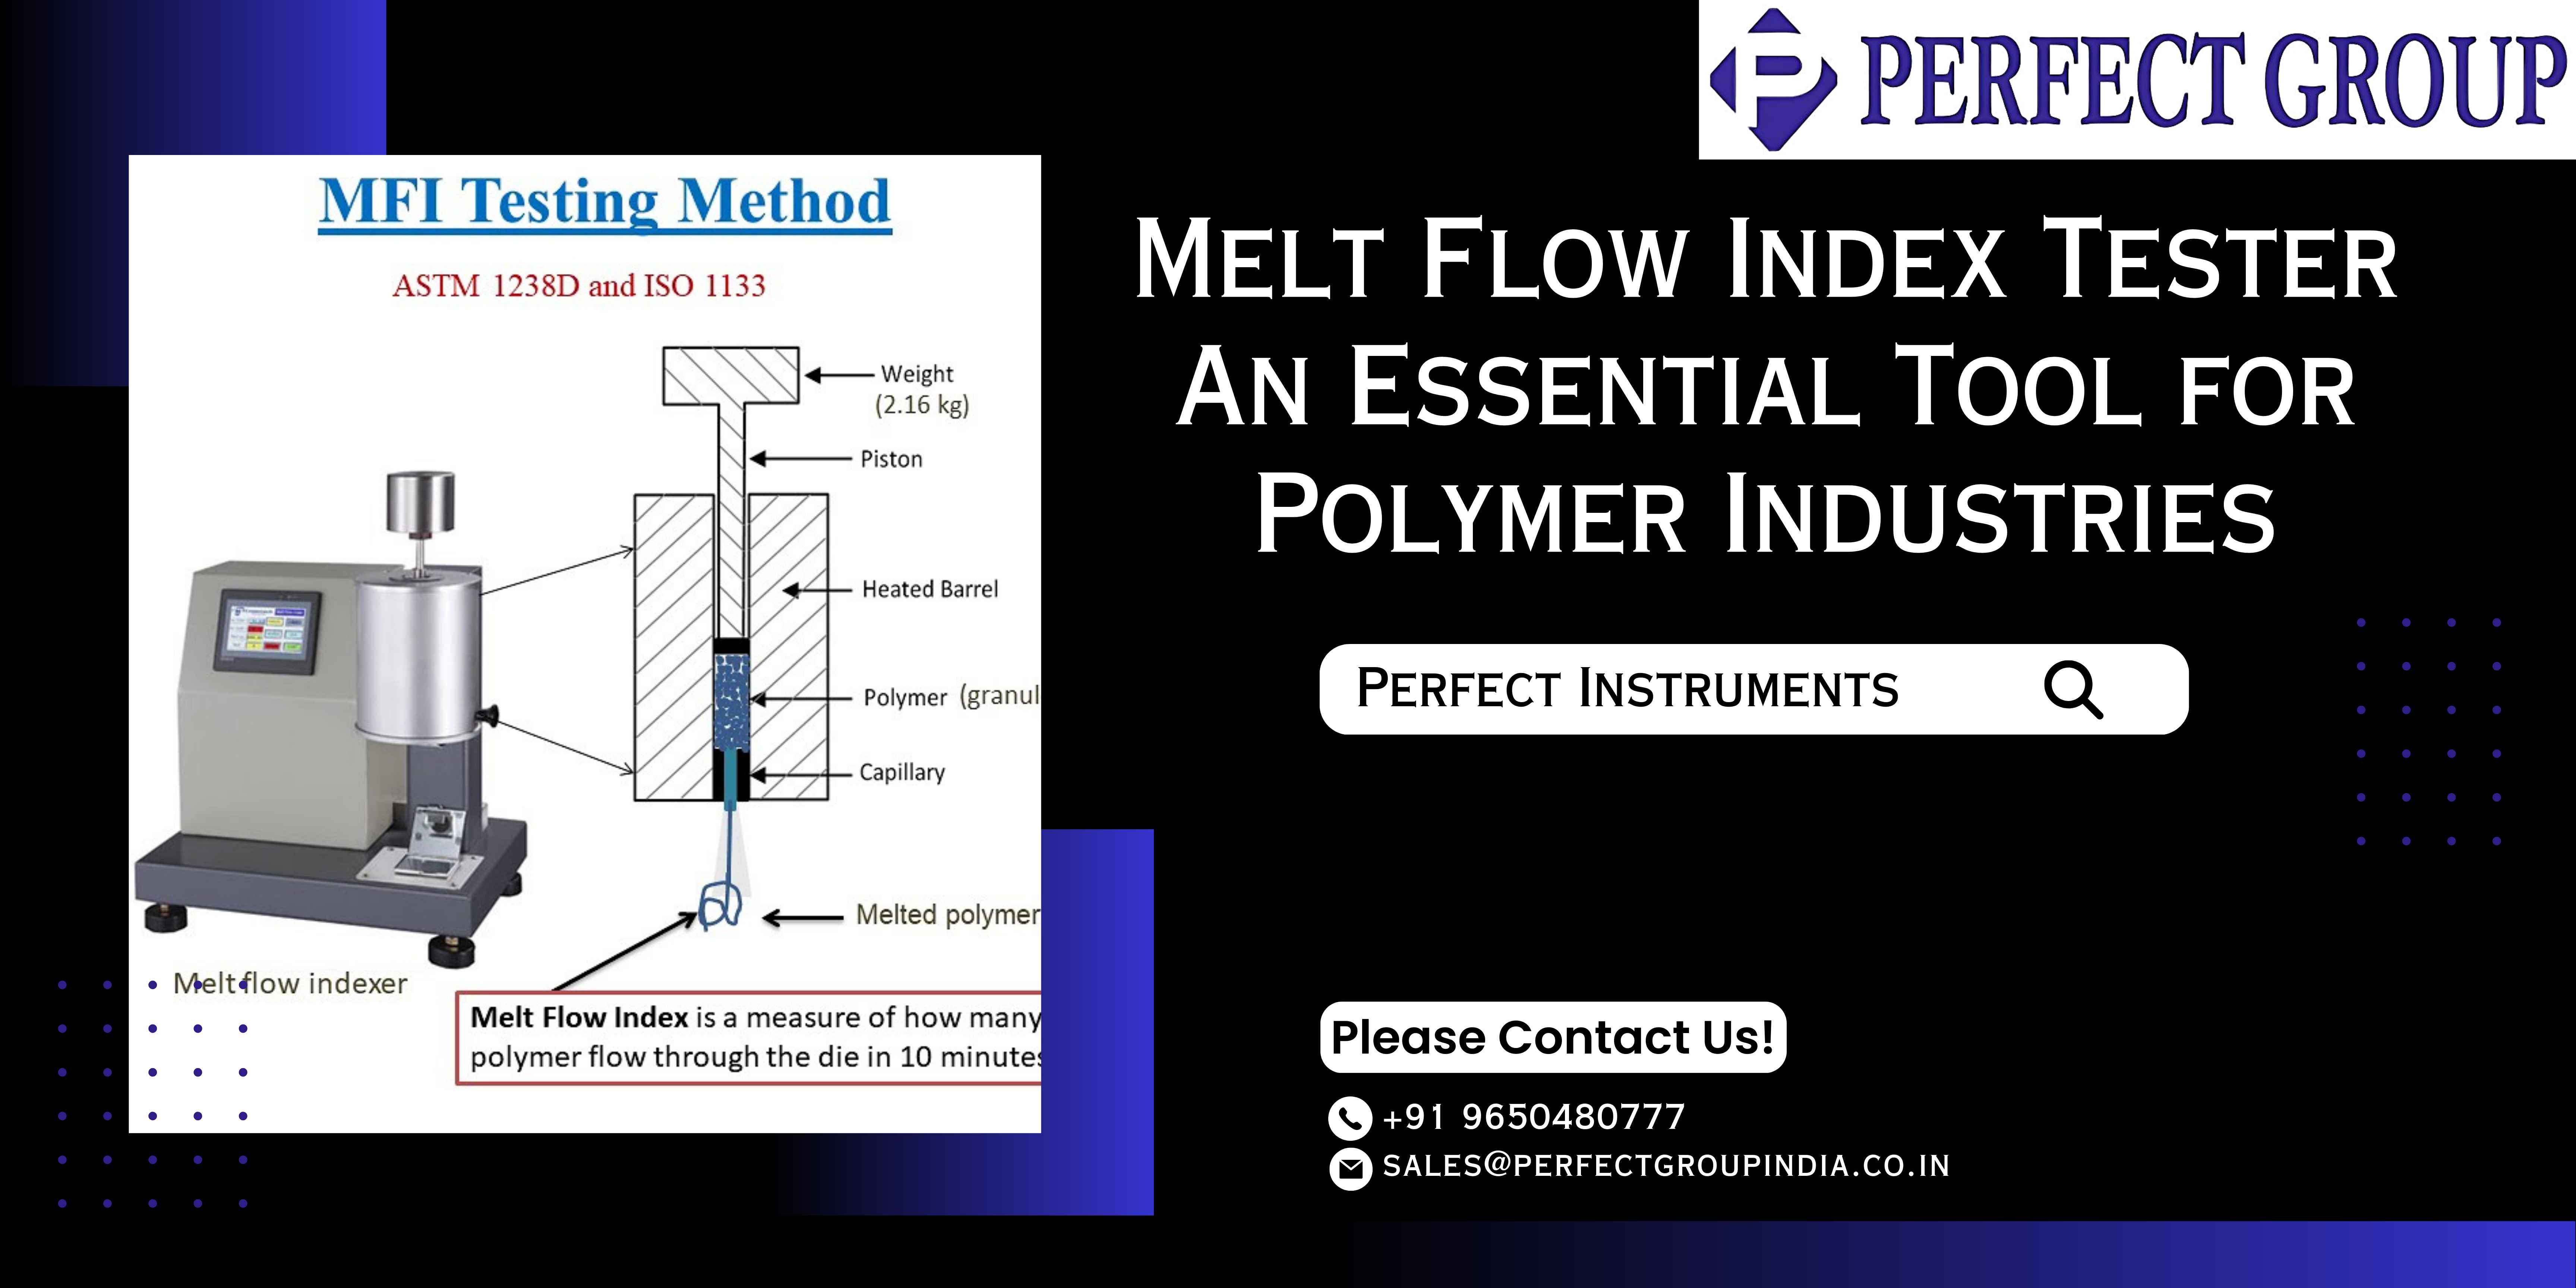  Melt Flow Index Tester: An Essential Tool for Polymer Industries